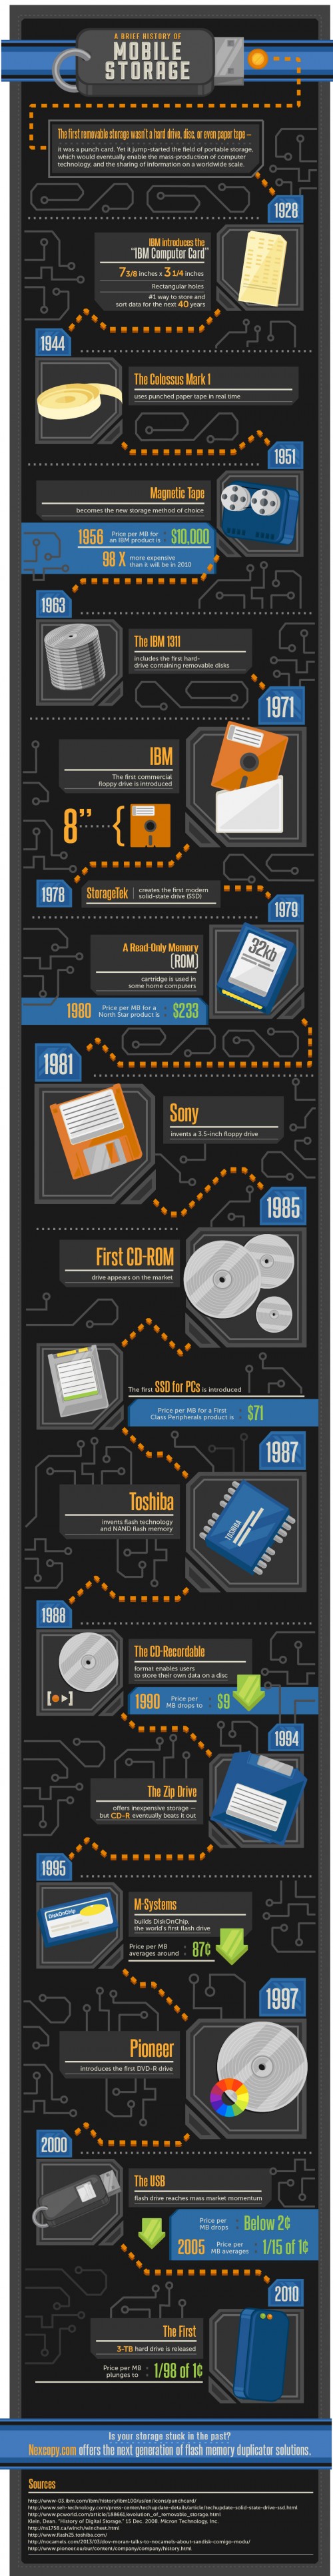 A Brief History of Portable Storage
https://www.nexcopy.com -
Portable storage has come a long way in the past 50 years. This infographic will take you through the history of portable storage, starting in 1928.
Nexcopy, USB Duplicator, USB Copier,